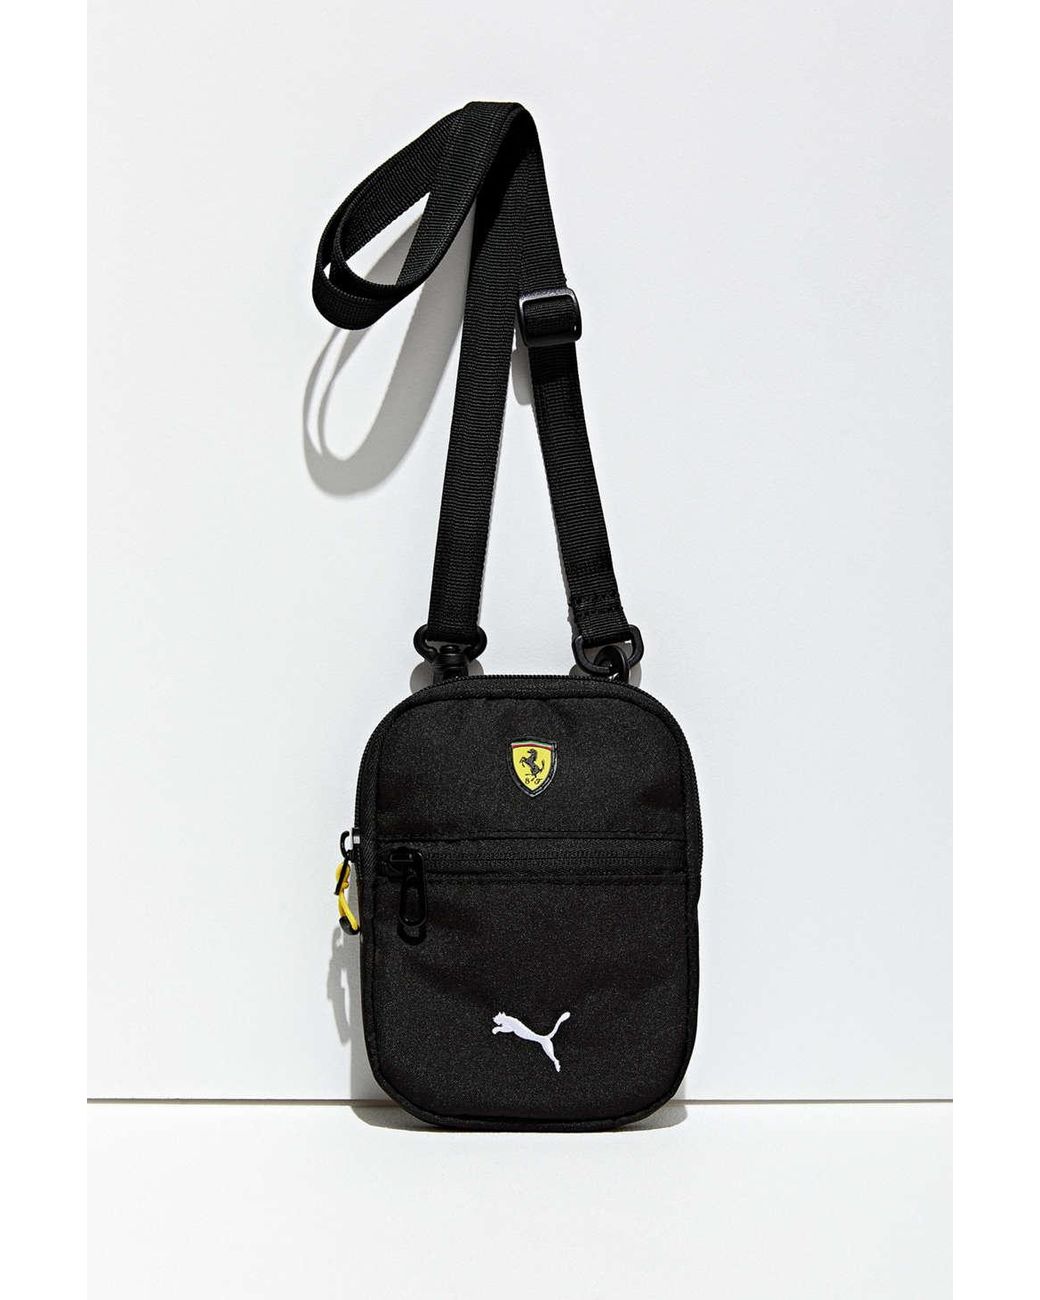 Top more than 72 puma black and white bag - in.cdgdbentre